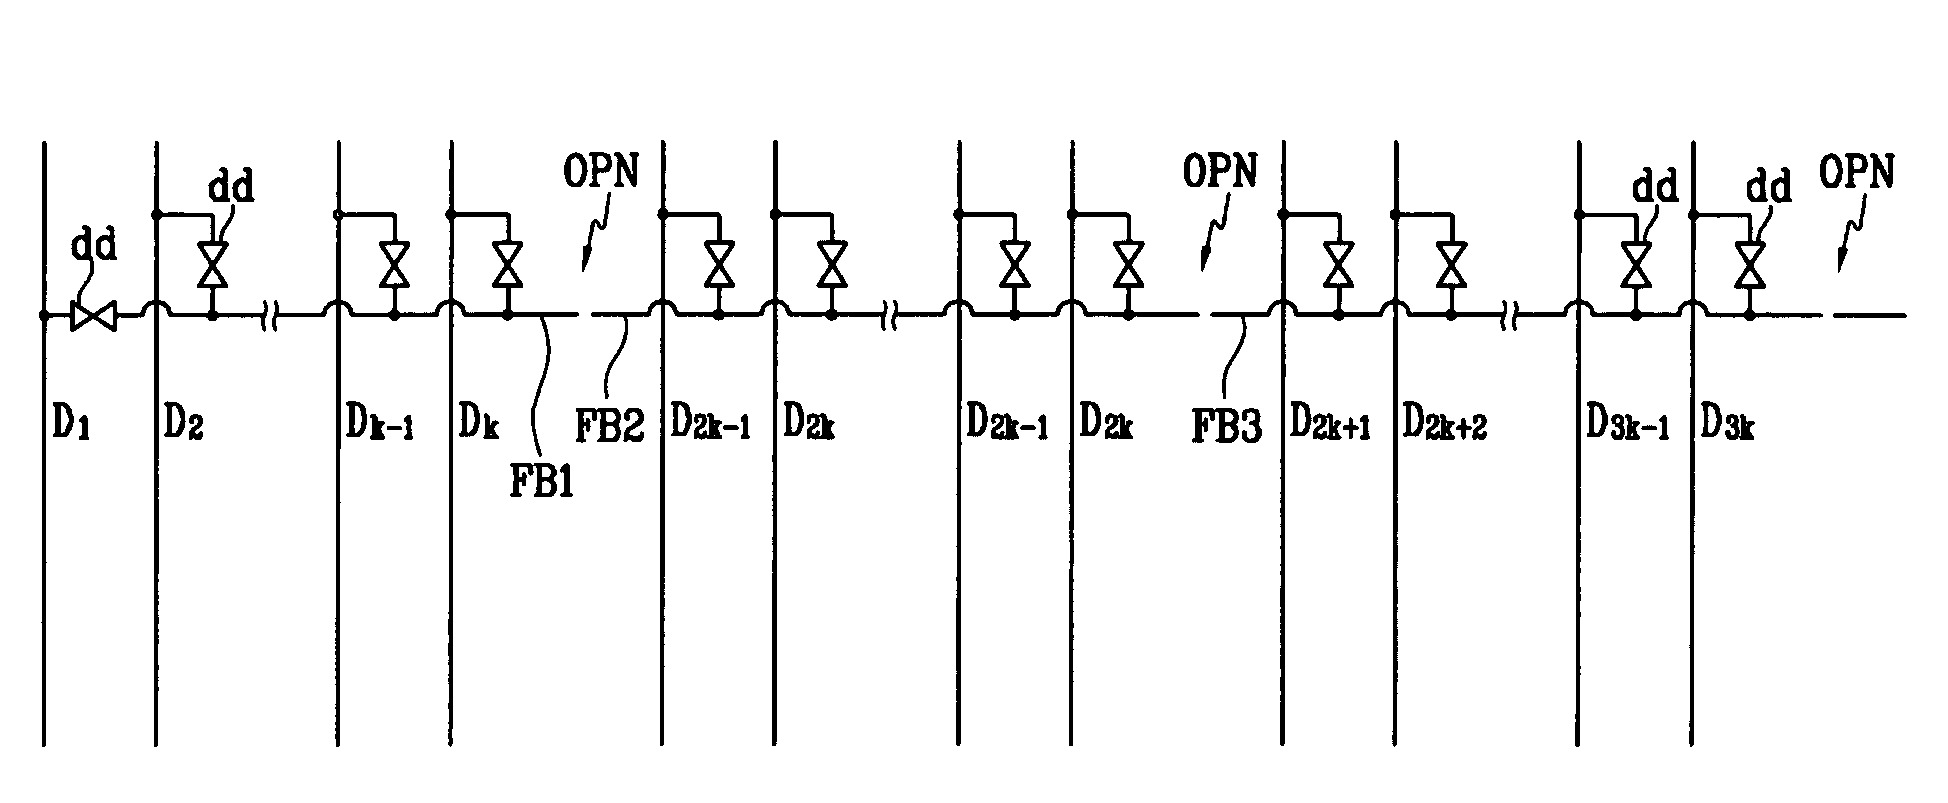 Display device with floating bar